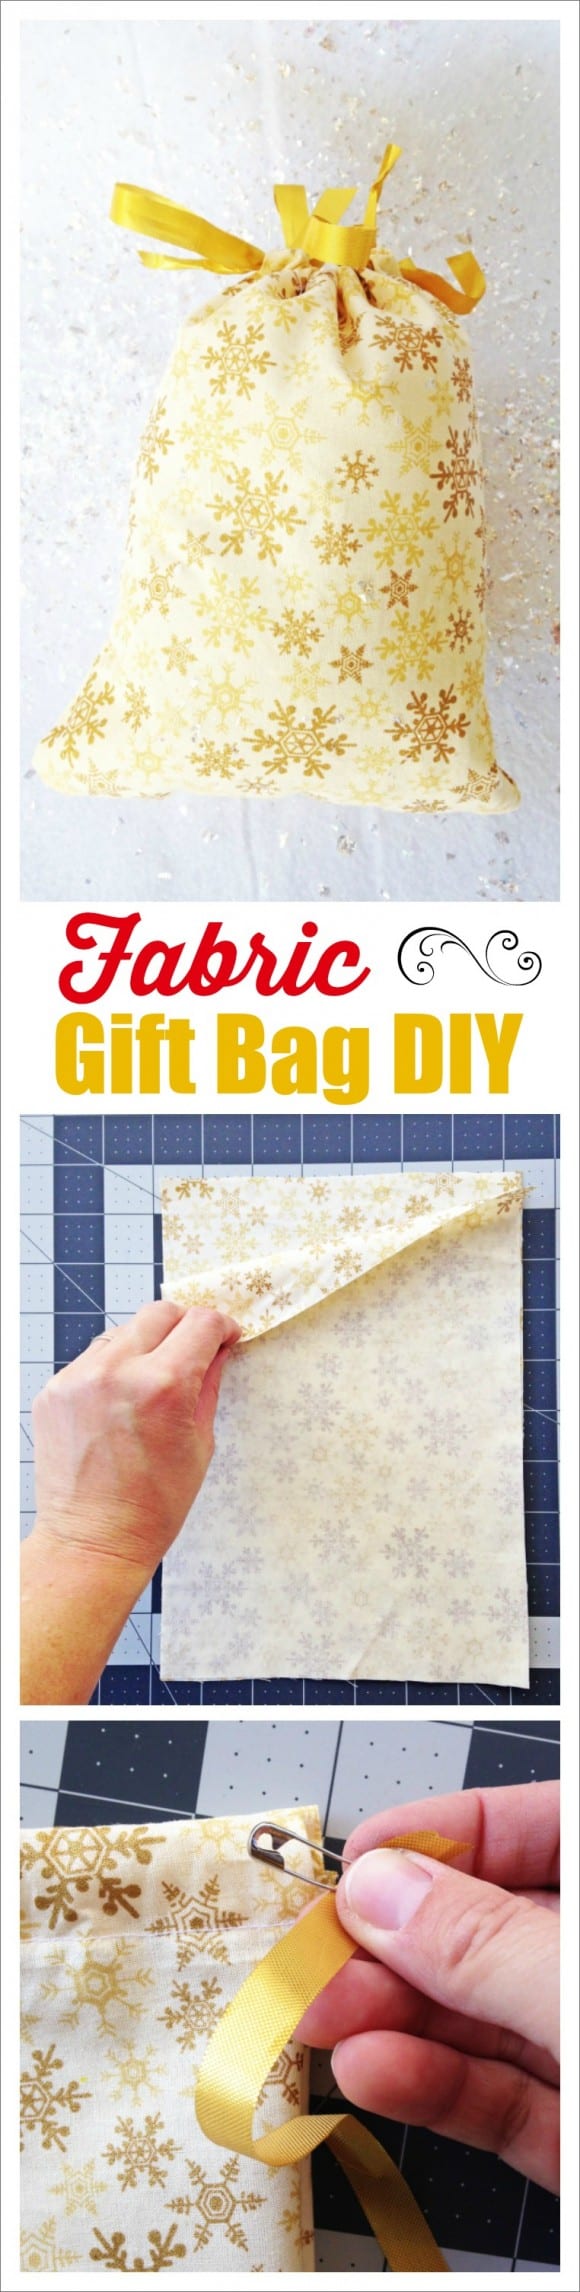 Fabric Gift Bag DIY | CatchMyParty.com